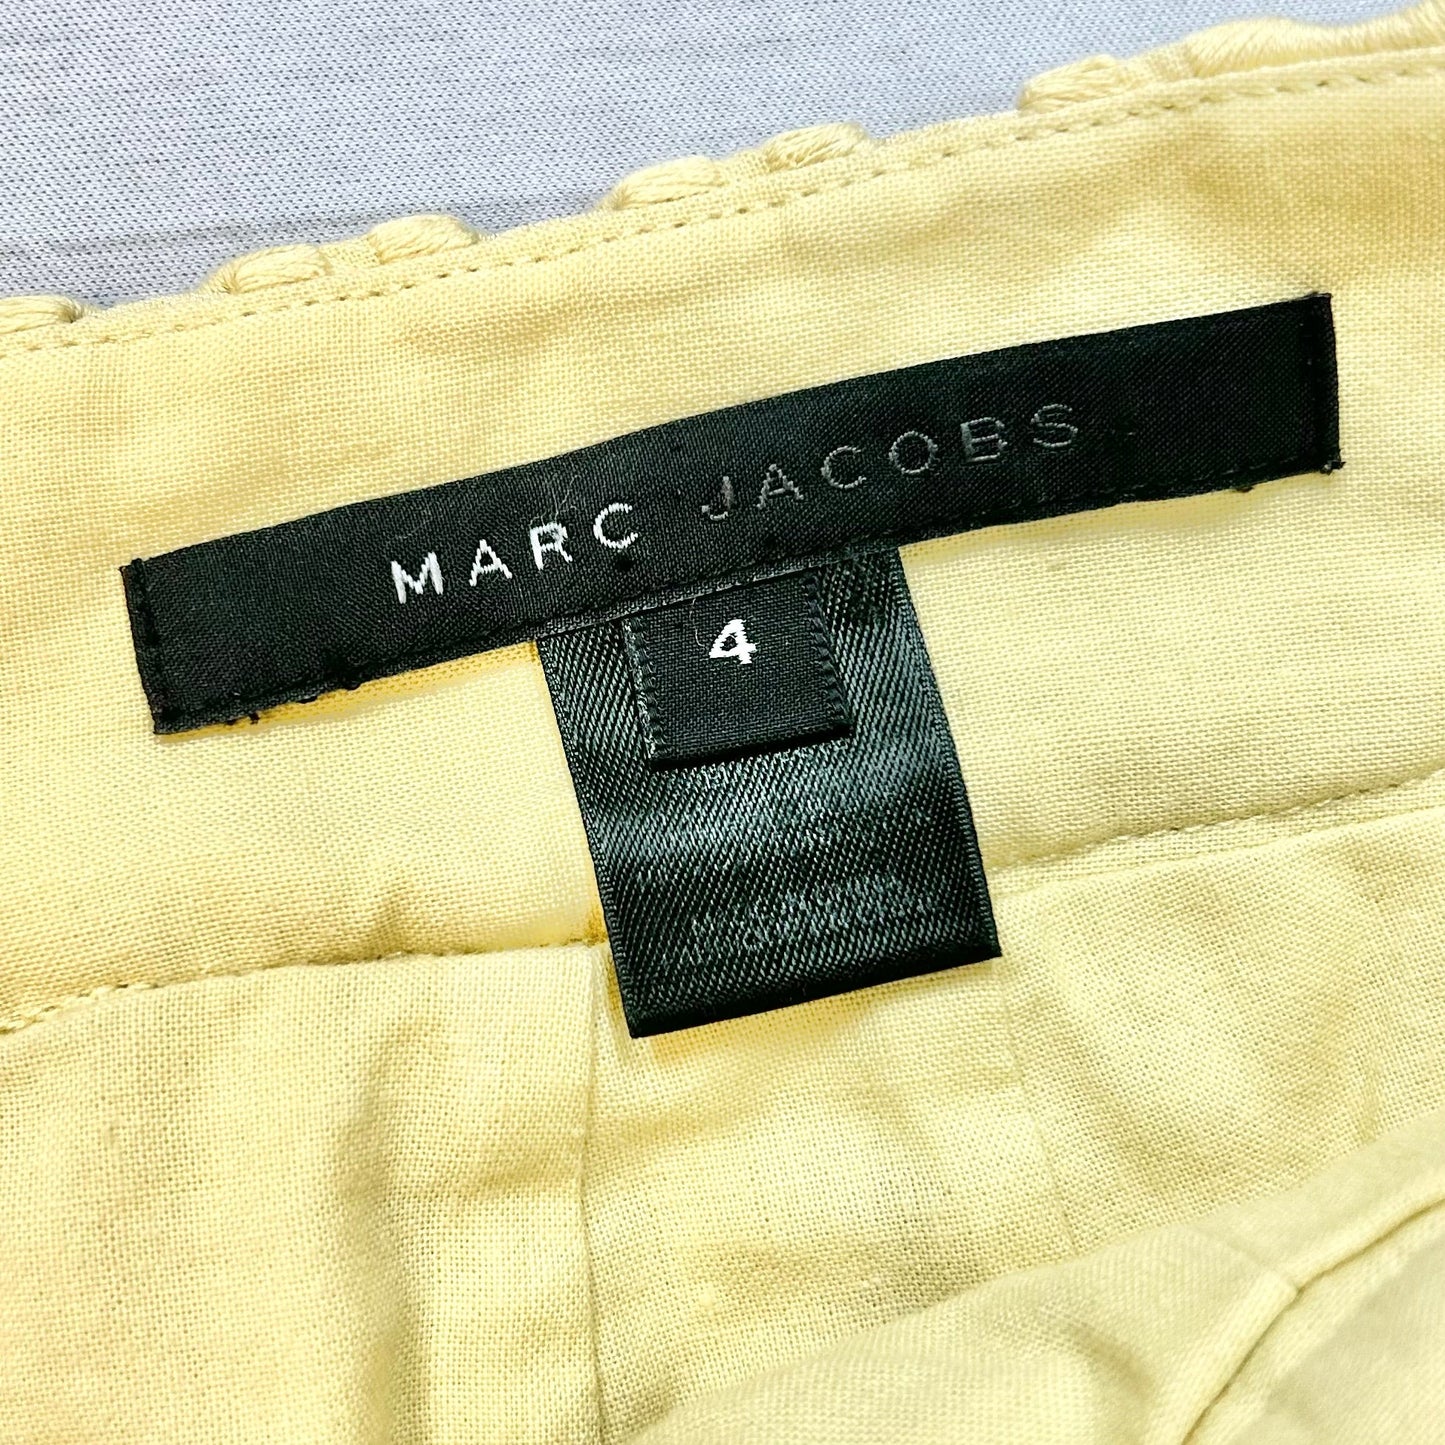 Skirt Designer By Marc Jacobs  Size: S